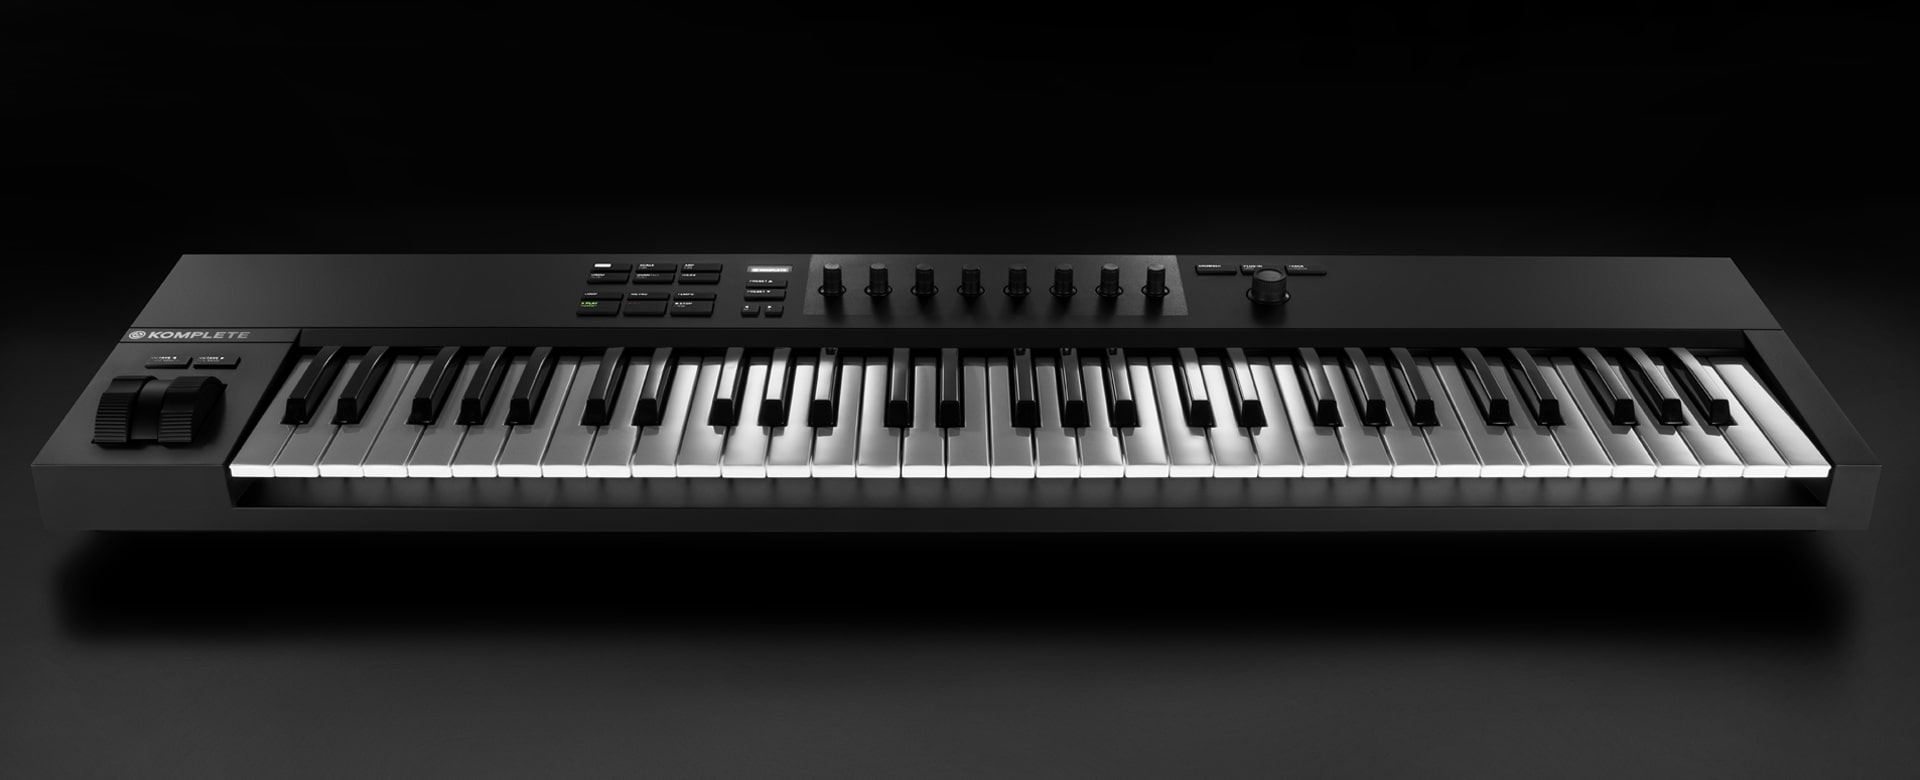 komplete kontrol a61 aftertouch